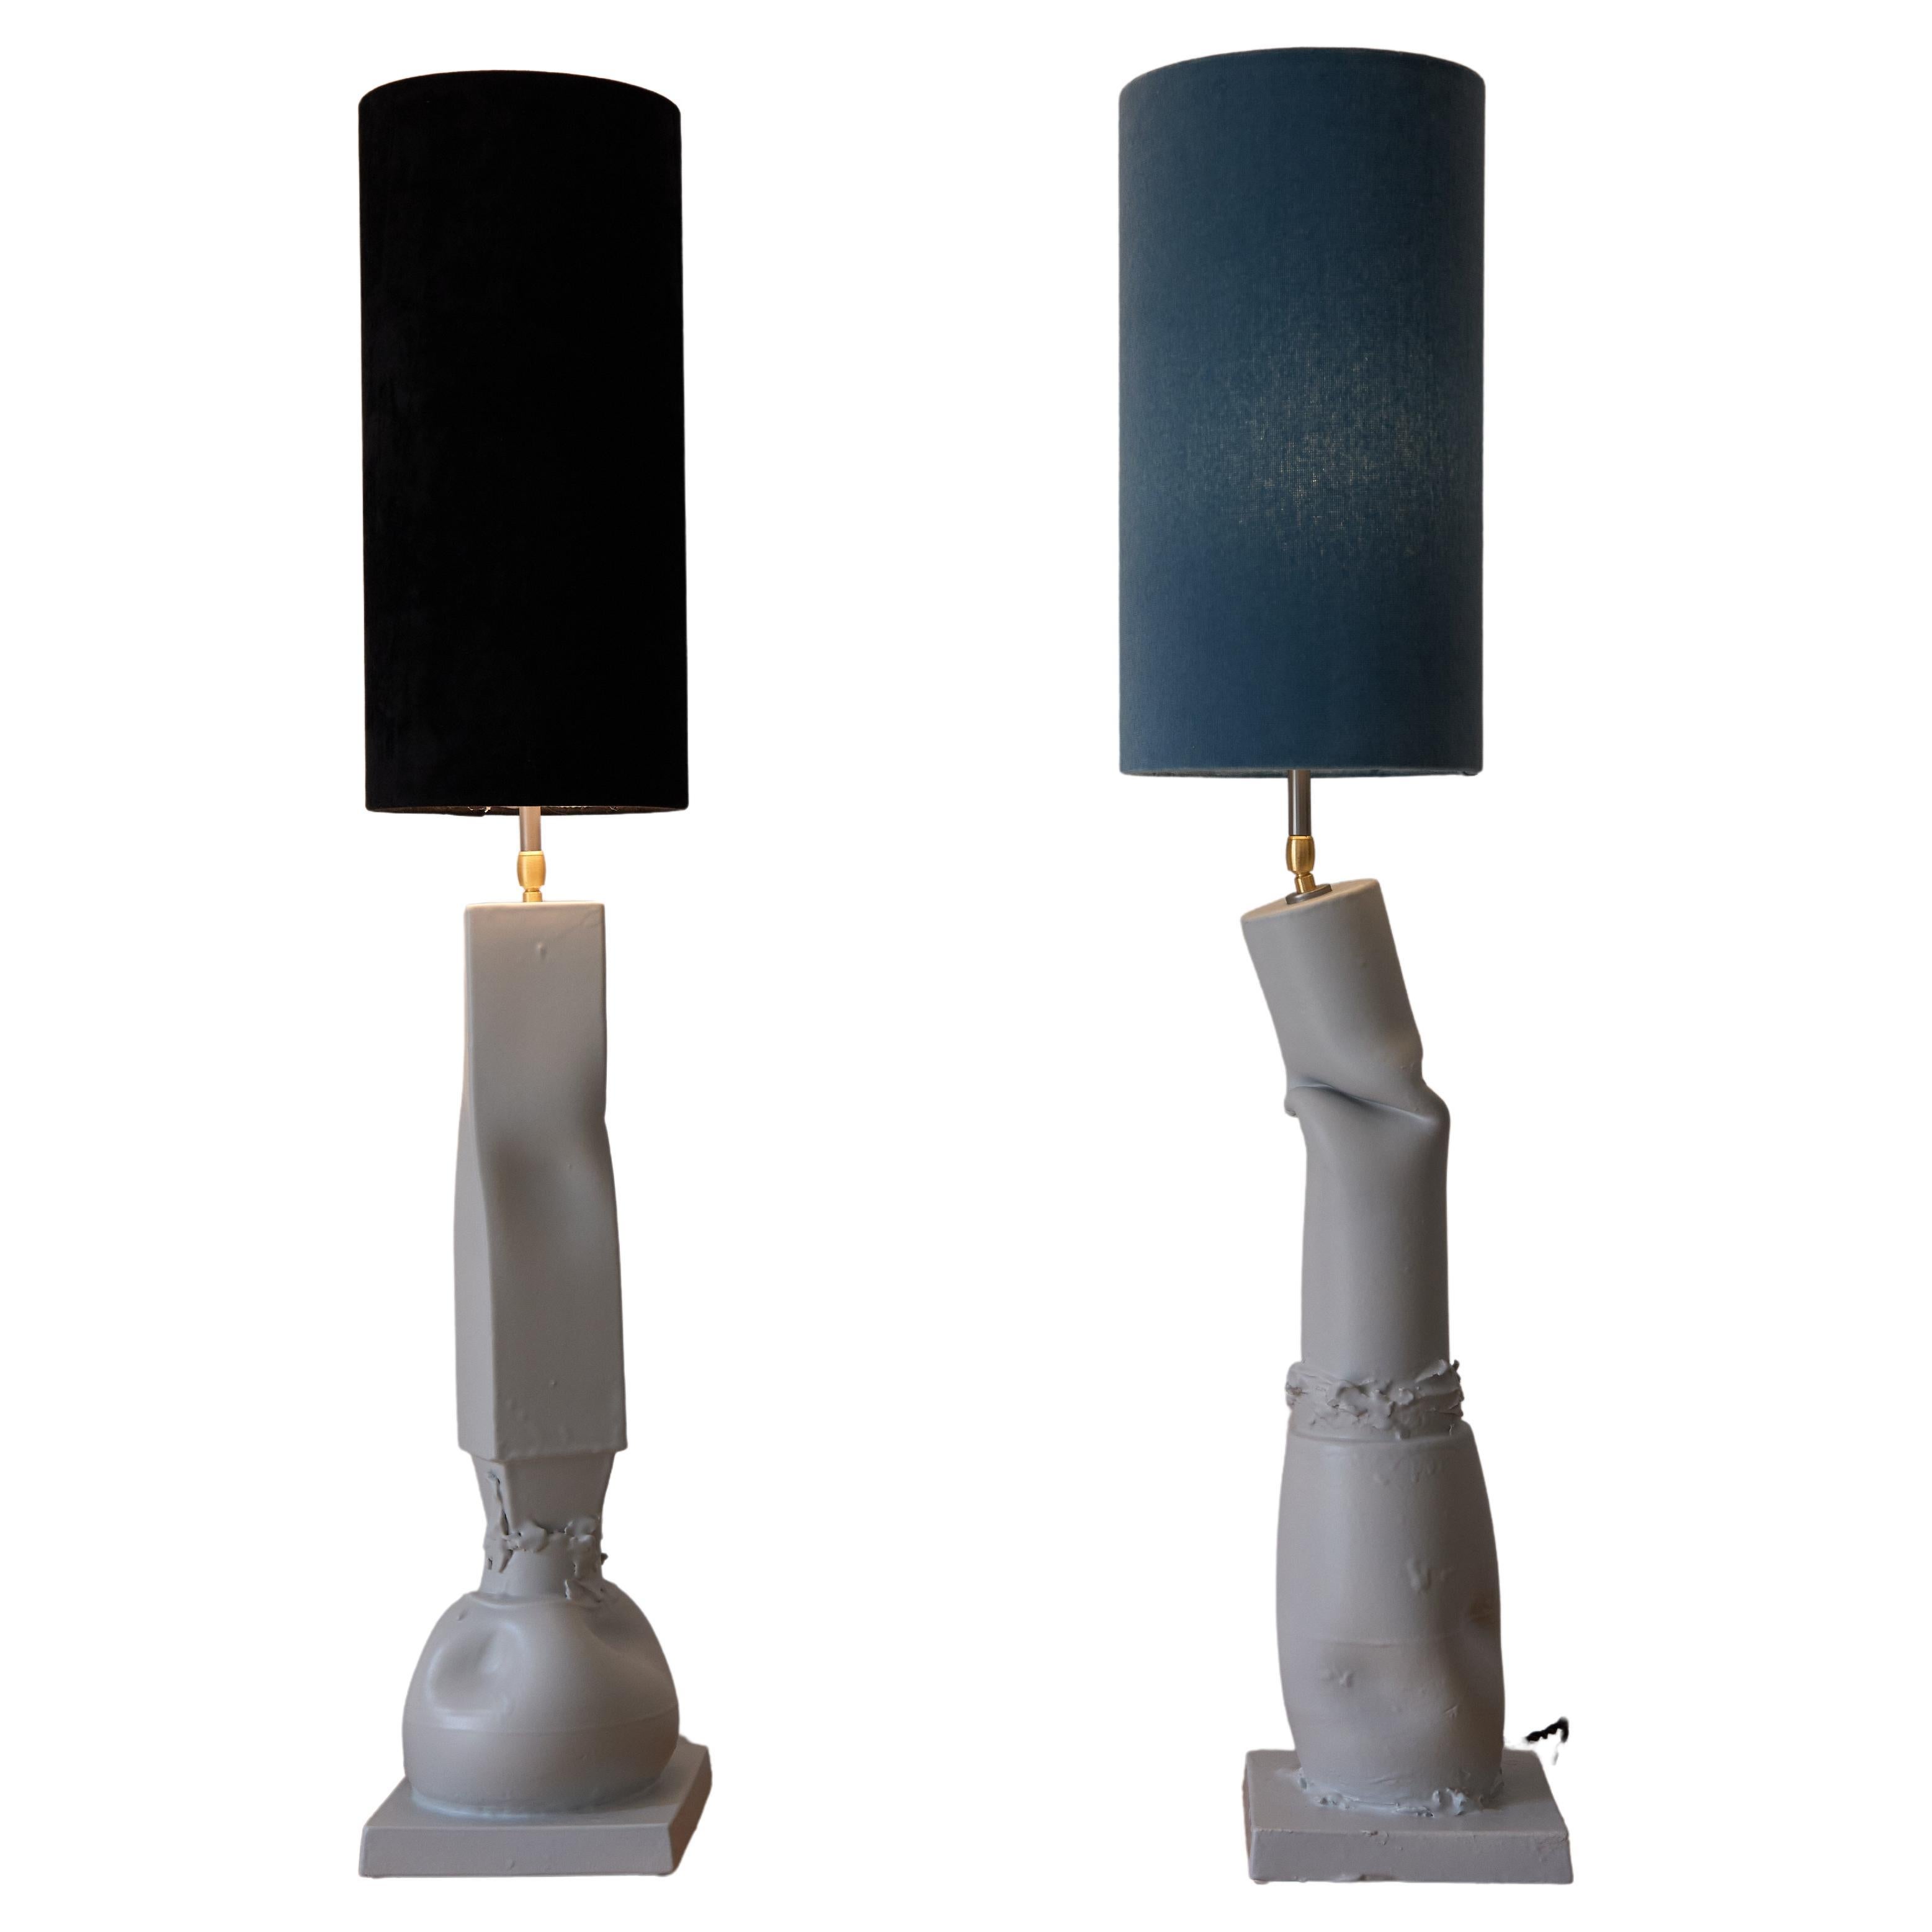 The Nove+Crespano and Treviso+Asiago lamp are part of a project entitled Break the Mold by artist Jenna Basso Pietrobon. Each lamp is unique and the lampshade direction is adjustable. The lamp is created by using a few different molds and the shapes